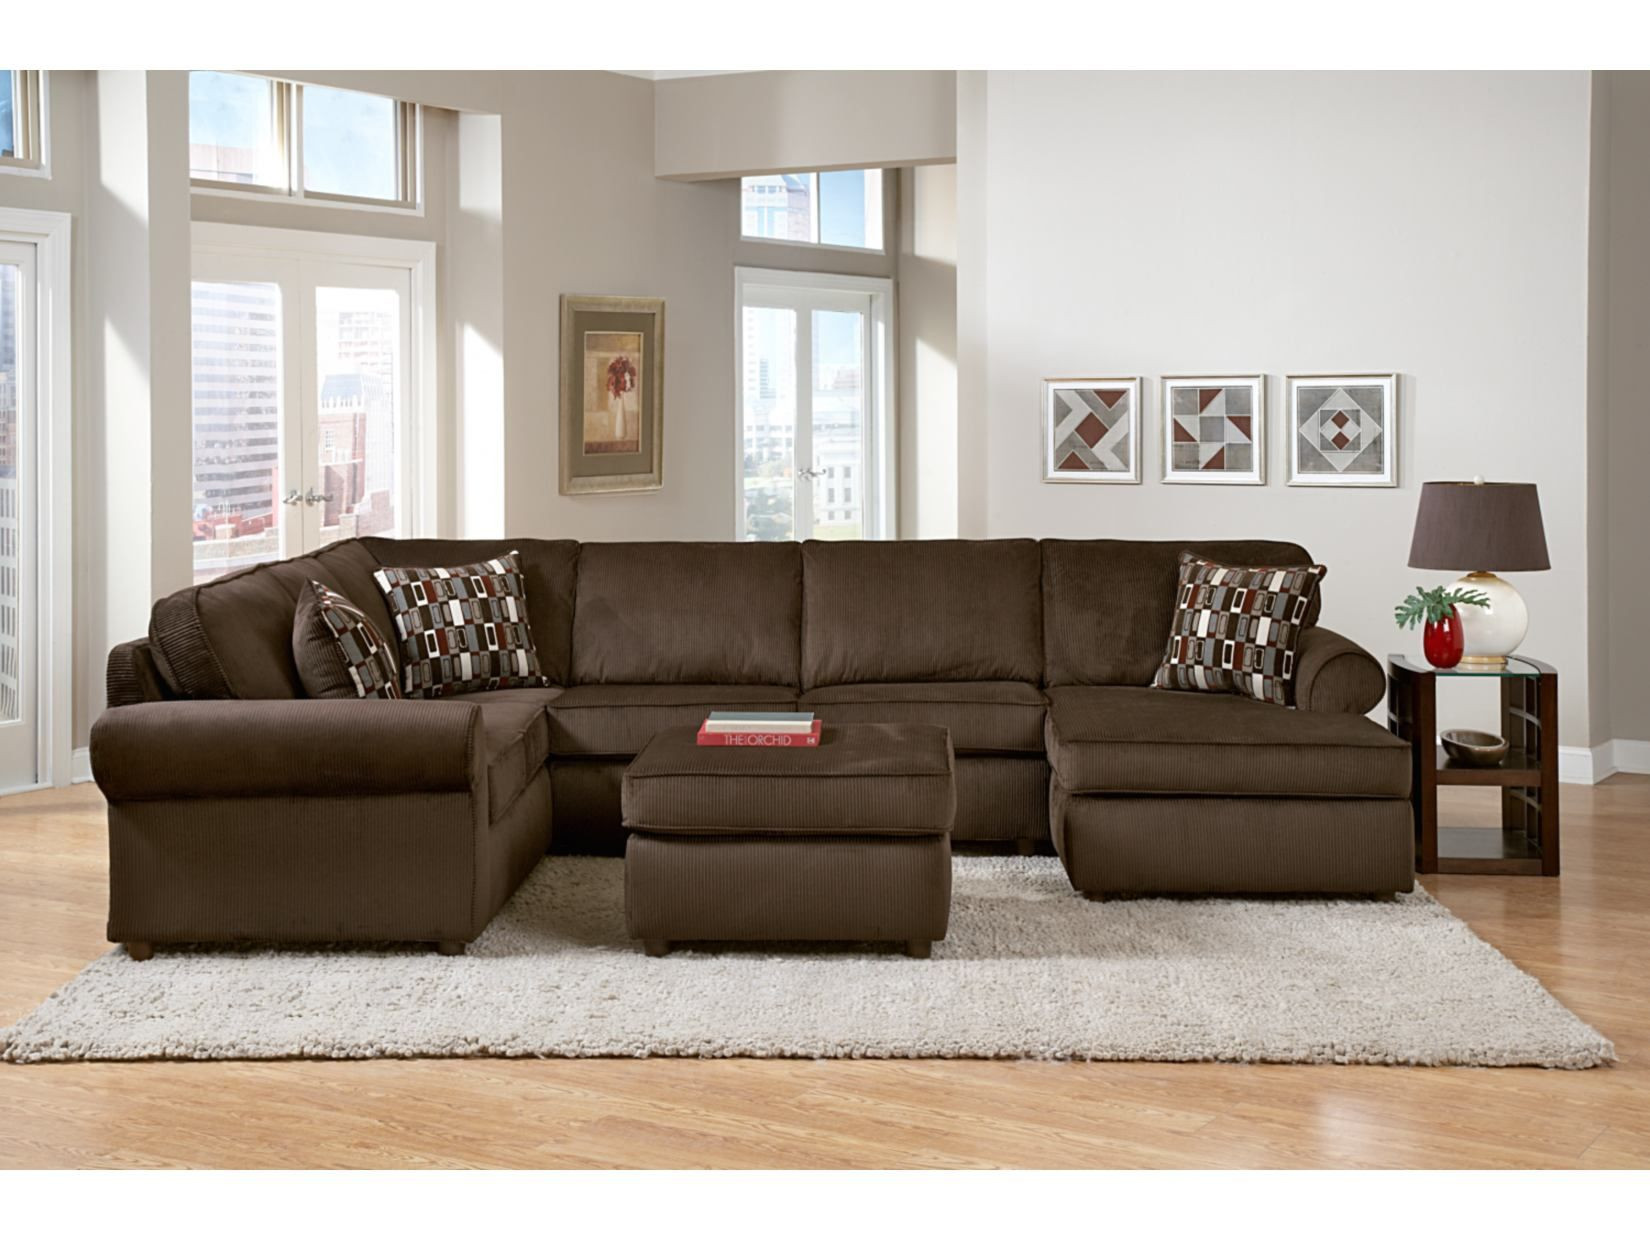 value city living room end tables